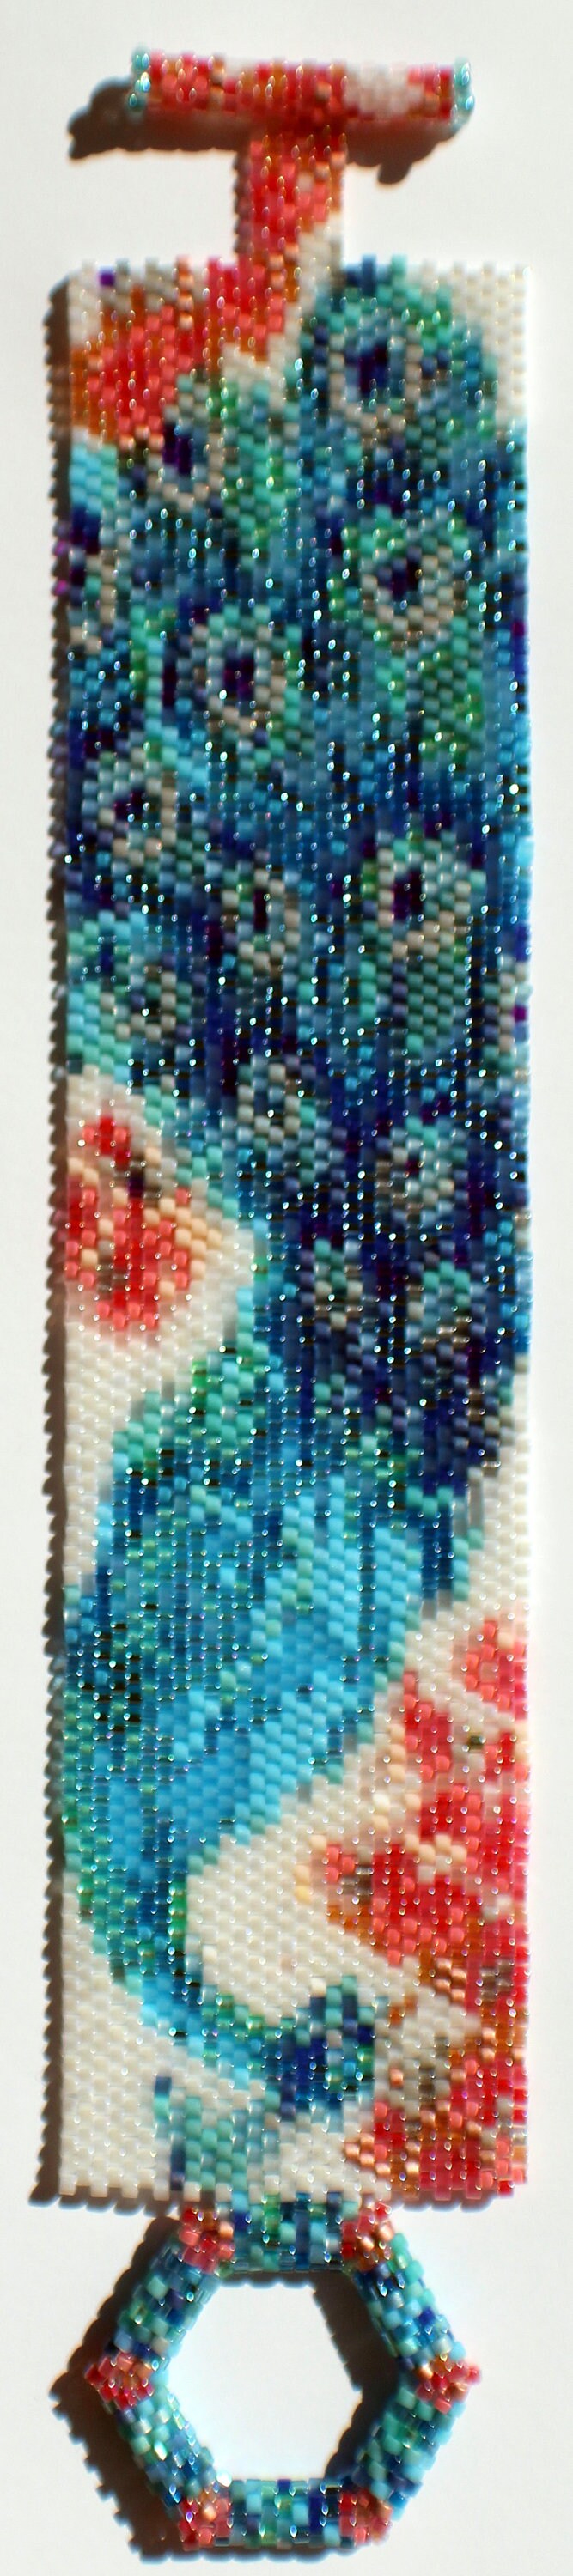 Purple and Aqua Bead Mat Envy Bead Boards for Jewelry Making